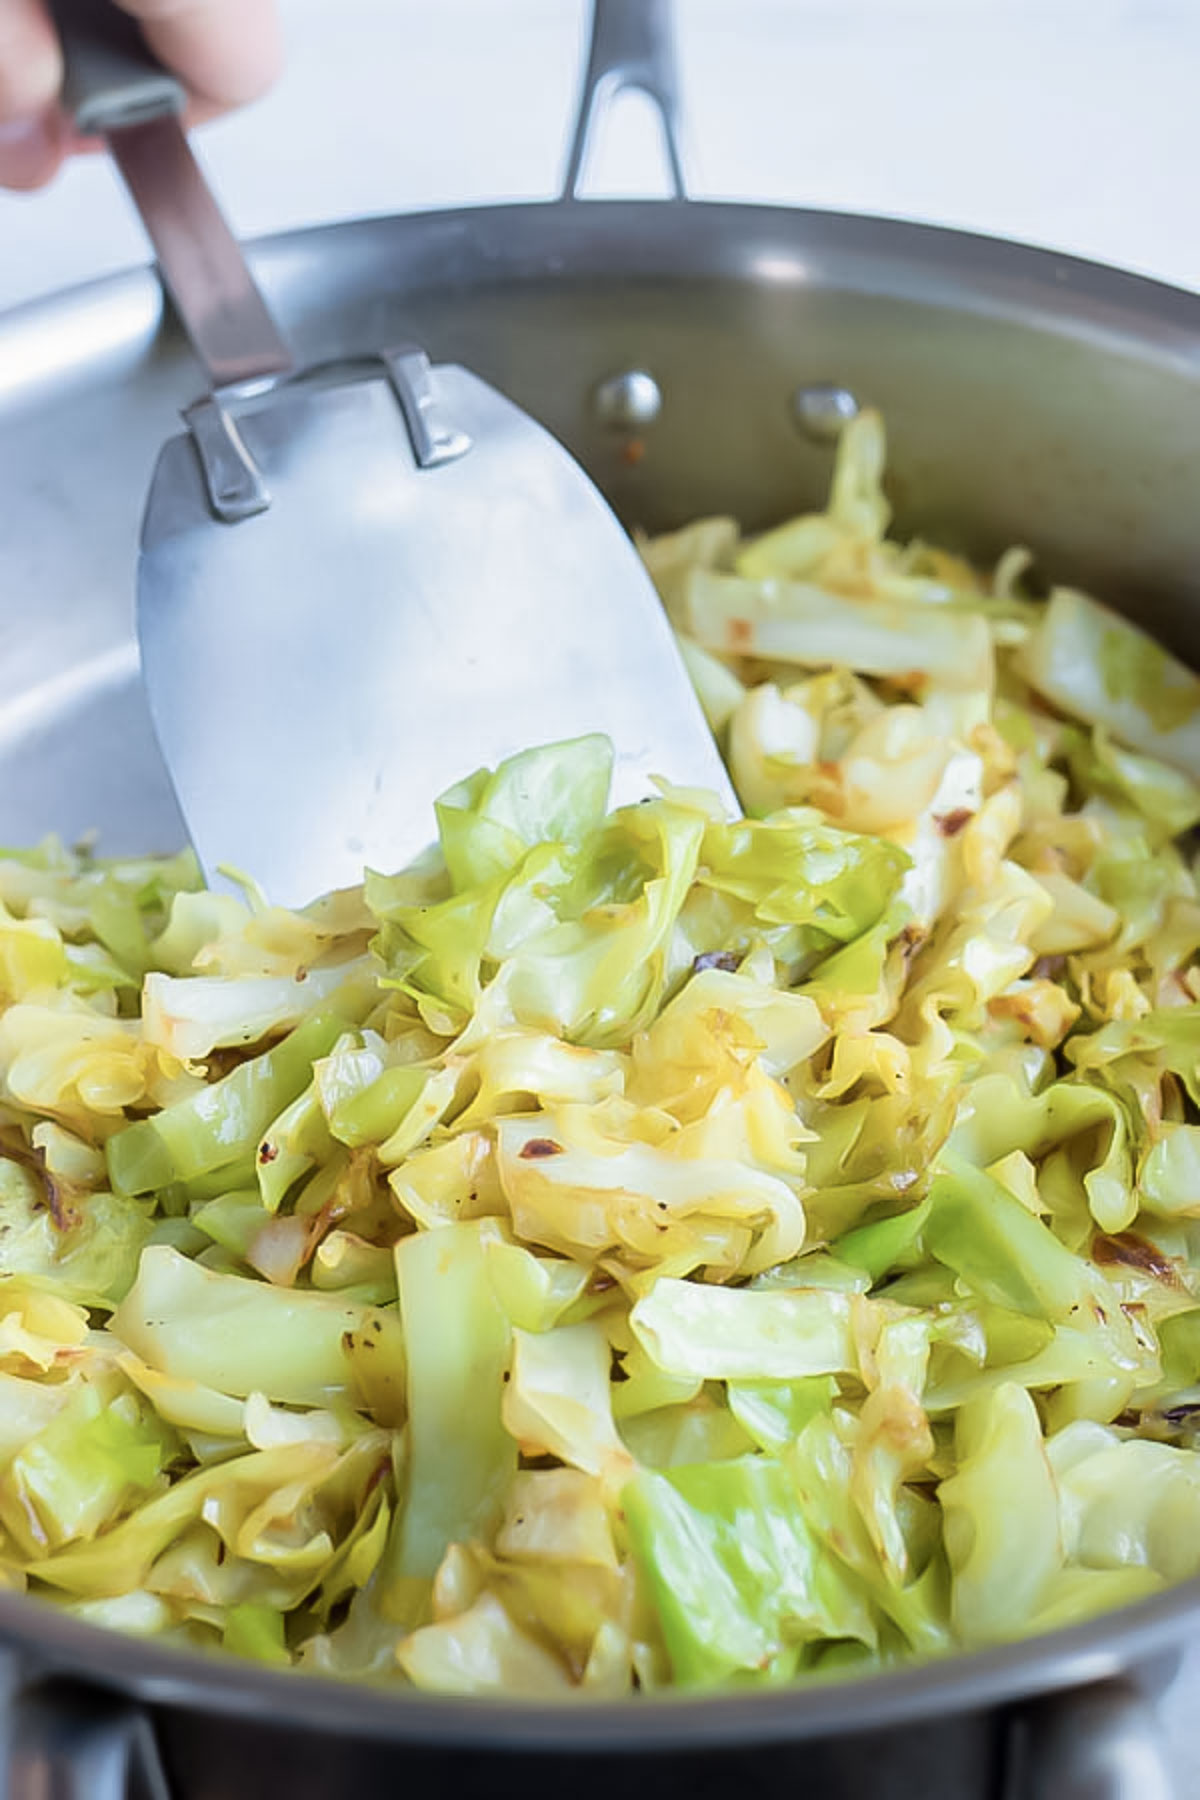 Cabbage is sautéed on the stove for a healthy side dish.